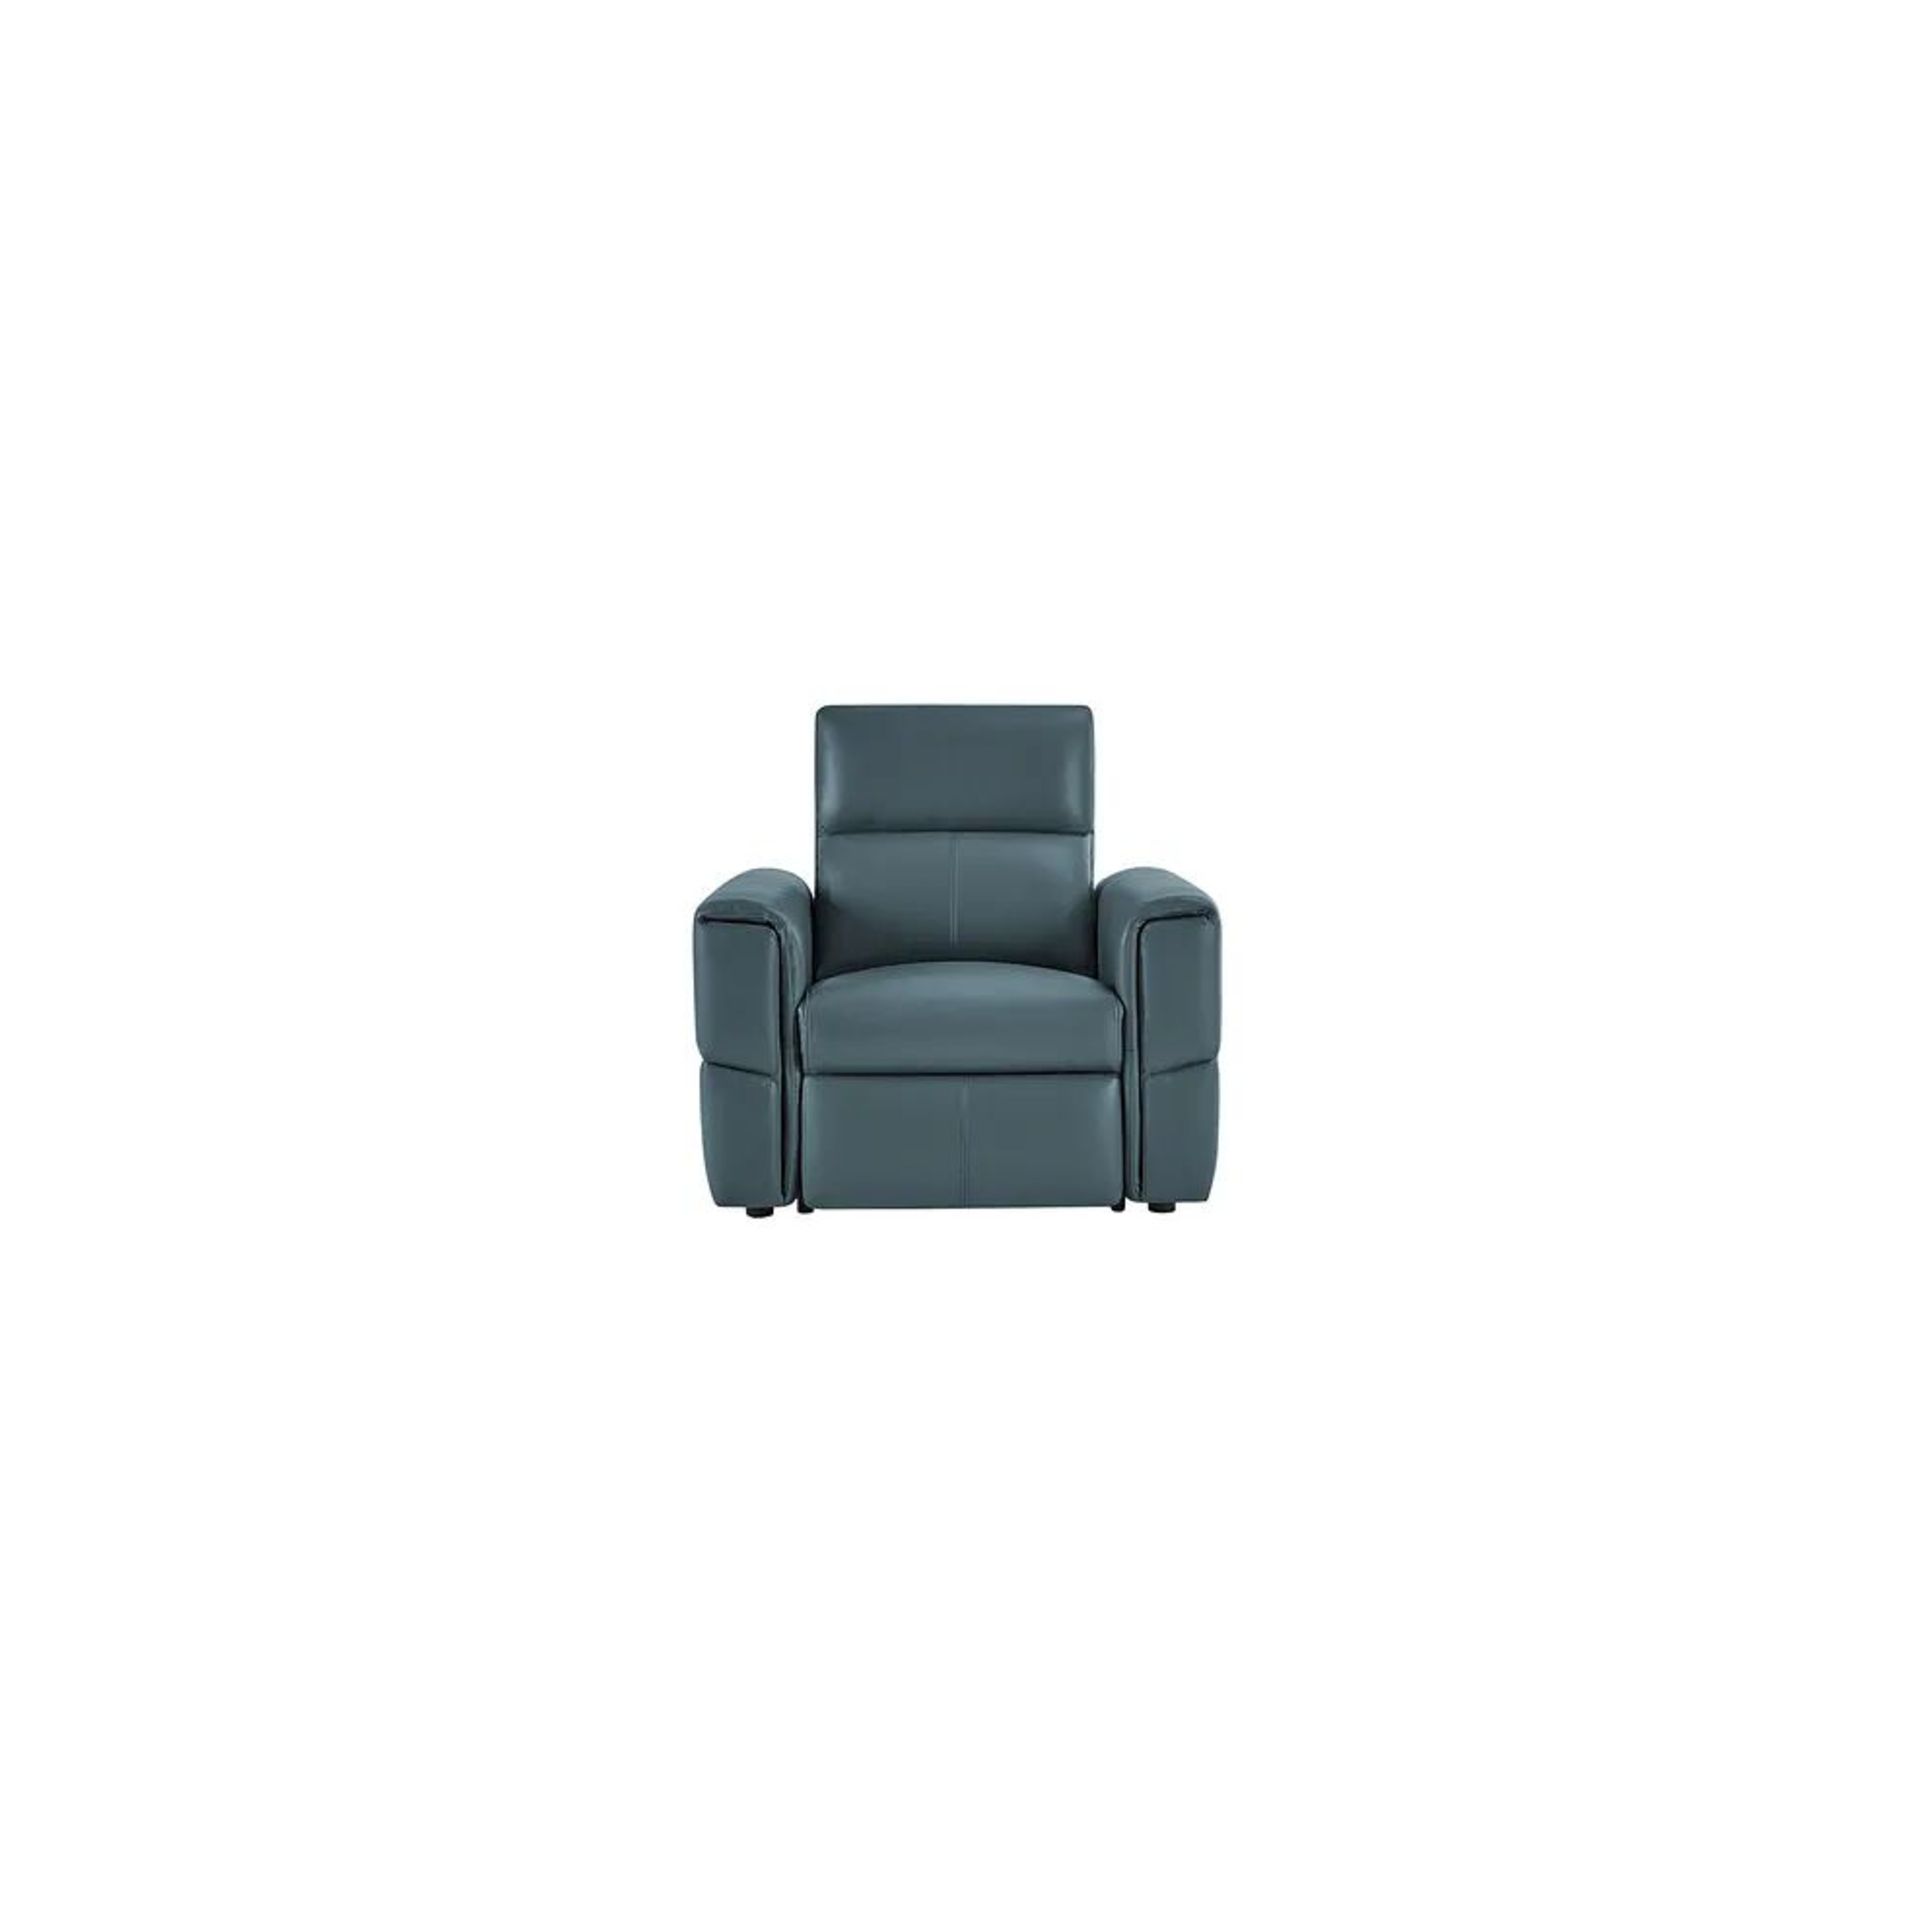 BRAND NEW SAMSON Electric Recliner Armchair - LIGHT BLUE LEATHER. RRP £1249. Showcasing neat, modern - Image 2 of 10